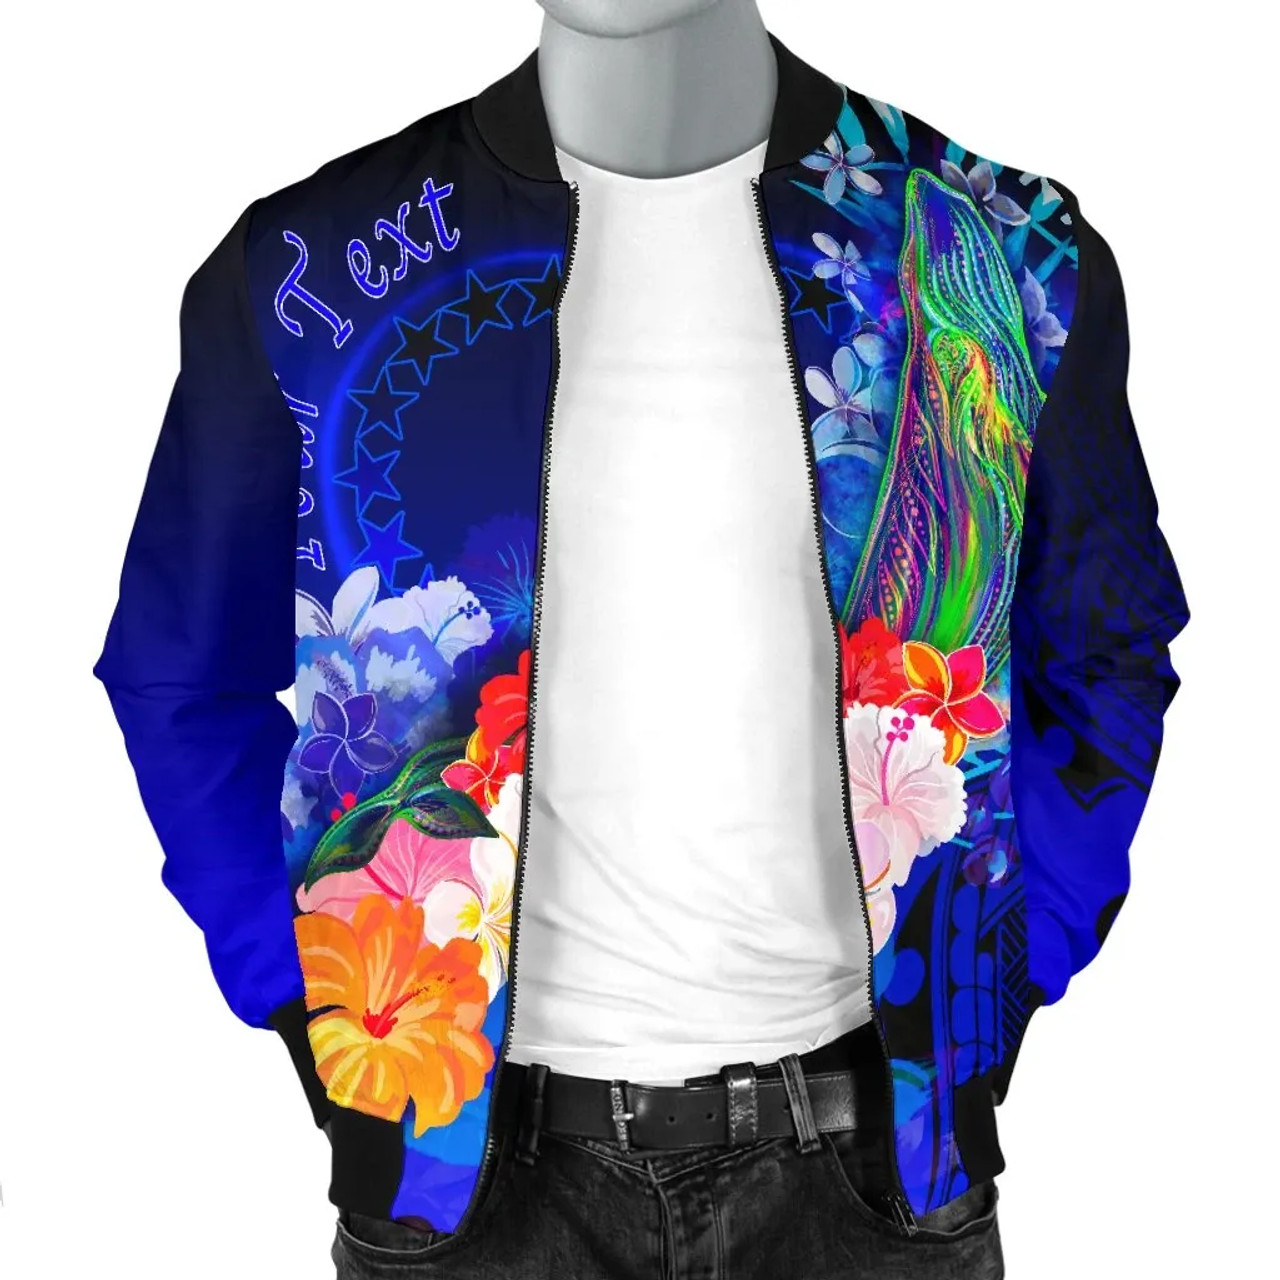 Cook Islands Custom Personalised Bomber Jacket - Humpback Whale with Tropical Flowers (Blue) 3